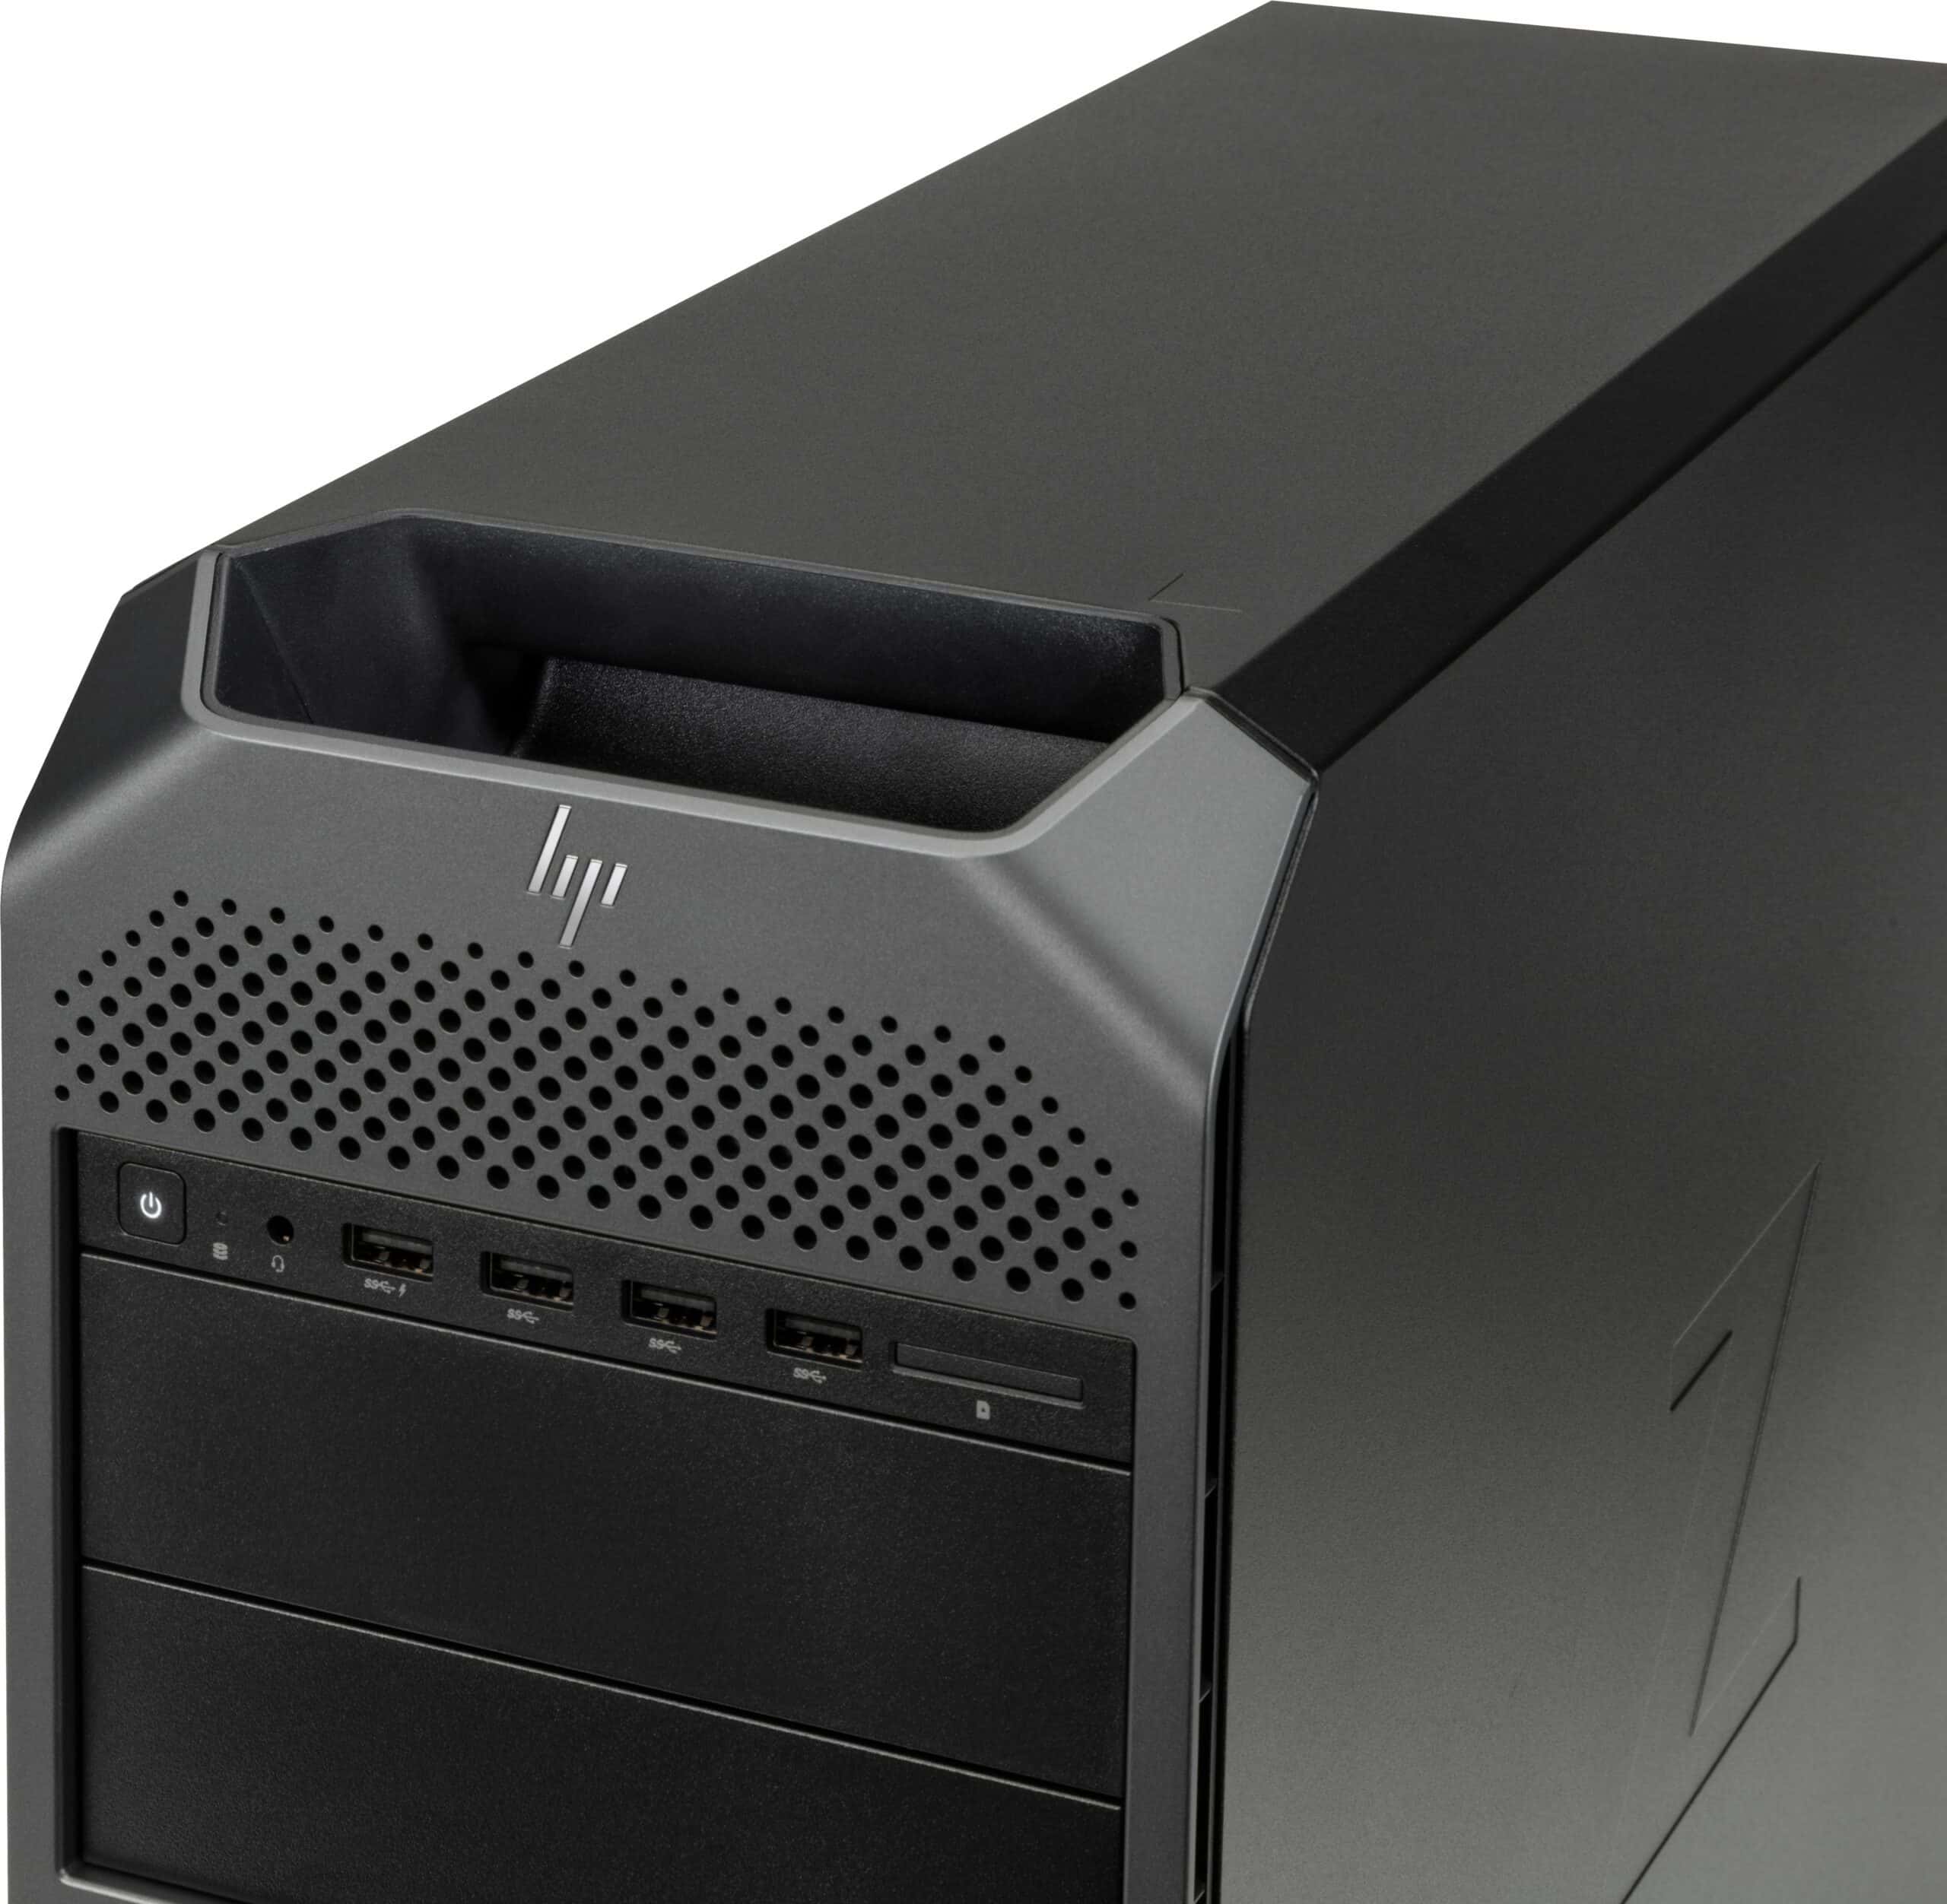 HP Z4 G4 Workstation Tower | Intel Xeon W-2125 4Cores | Ram 32Gb | SSD 1Tb nvme | Nvidia Quadro P2000 | Windows 11 Pro The unrivaled workstation